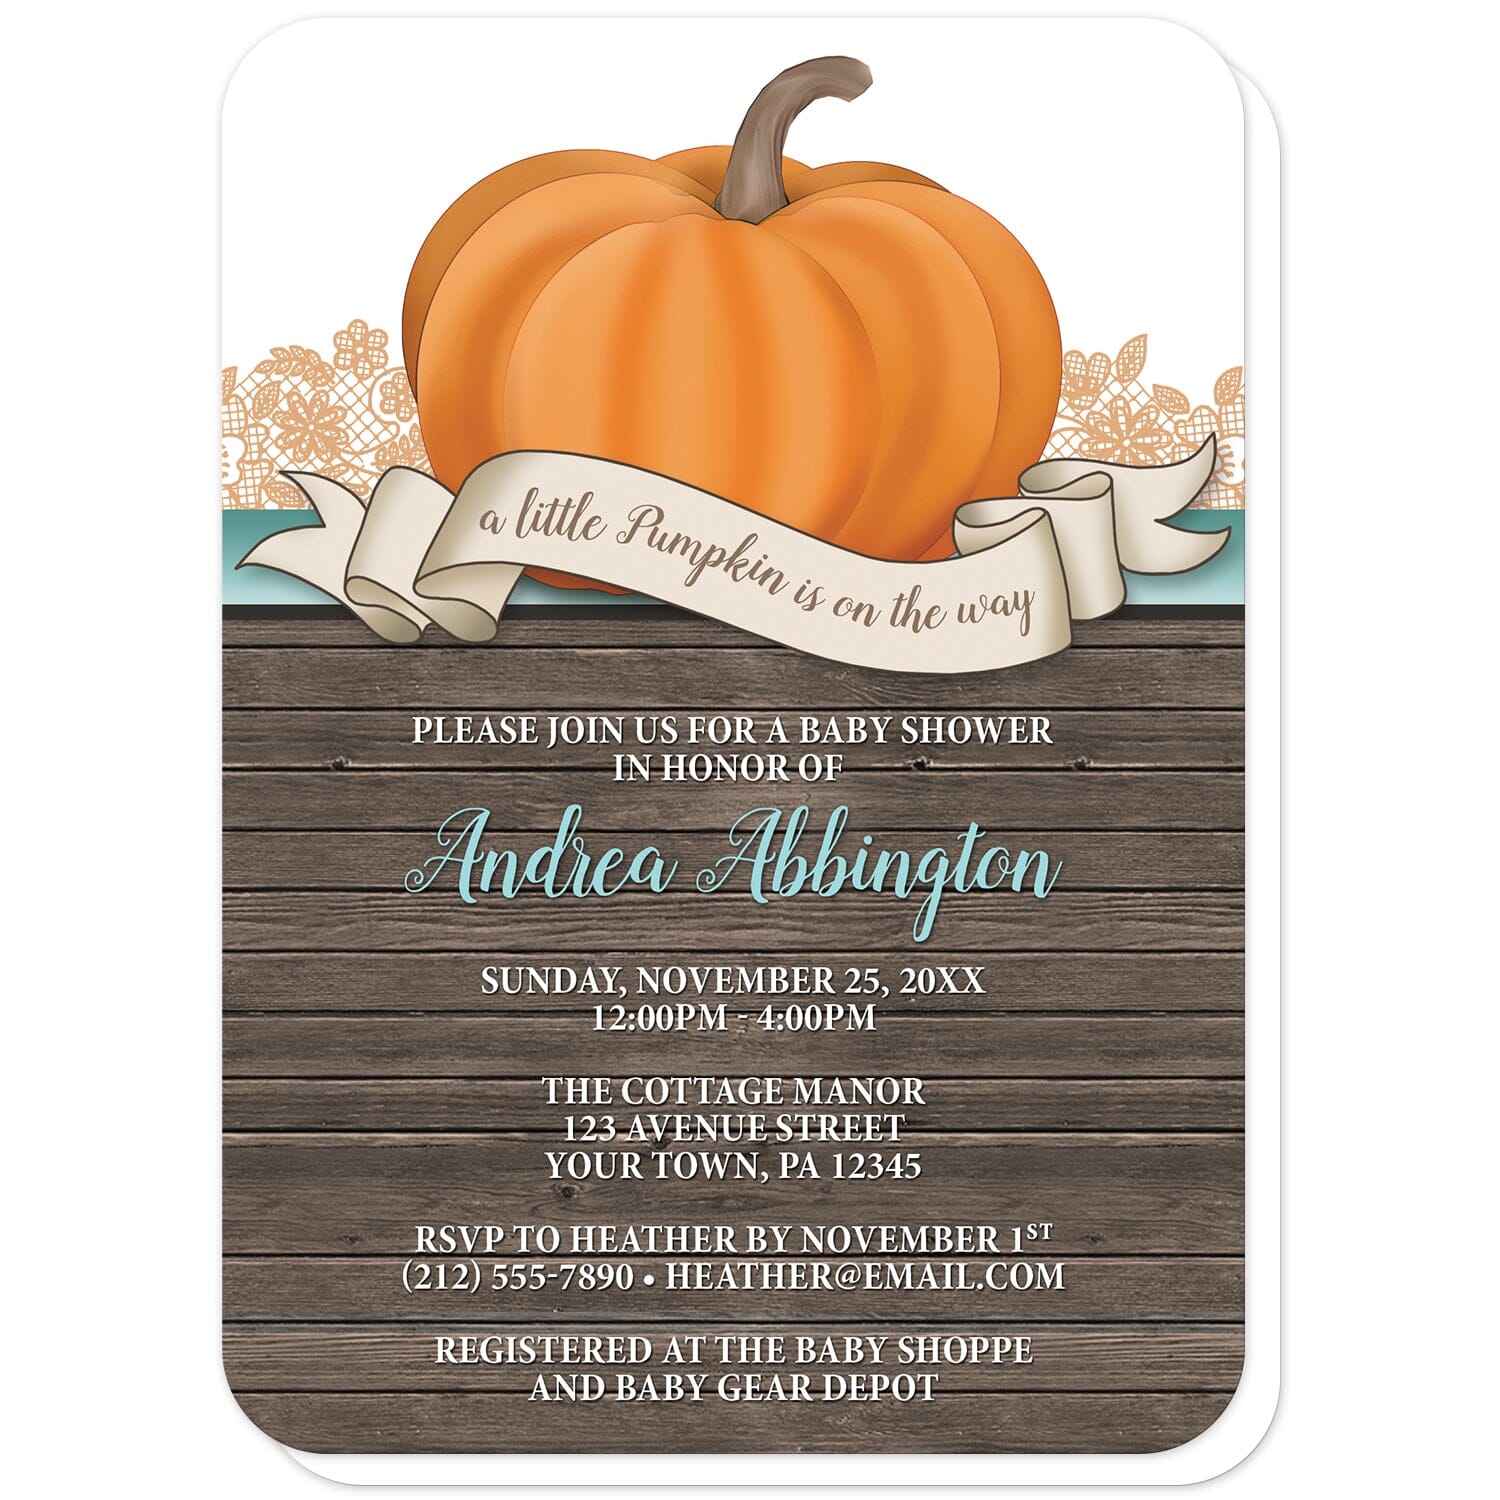 Rustic Orange Teal Pumpkin Baby Shower Invitations (with rounded corners) at Artistically Invited. Rustic orange teal pumpkin baby shower invitations with an illustration of an orange pumpkin over wood and a beige ribbon banner that reads: "a little pumpkin is on the way". This cute pumpkin drawing is set on a horizontal teal stripe with orange lace. The personalized baby shower celebration details you provide will be custom printed in teal and white over a country brown wood background below the pumpkin.